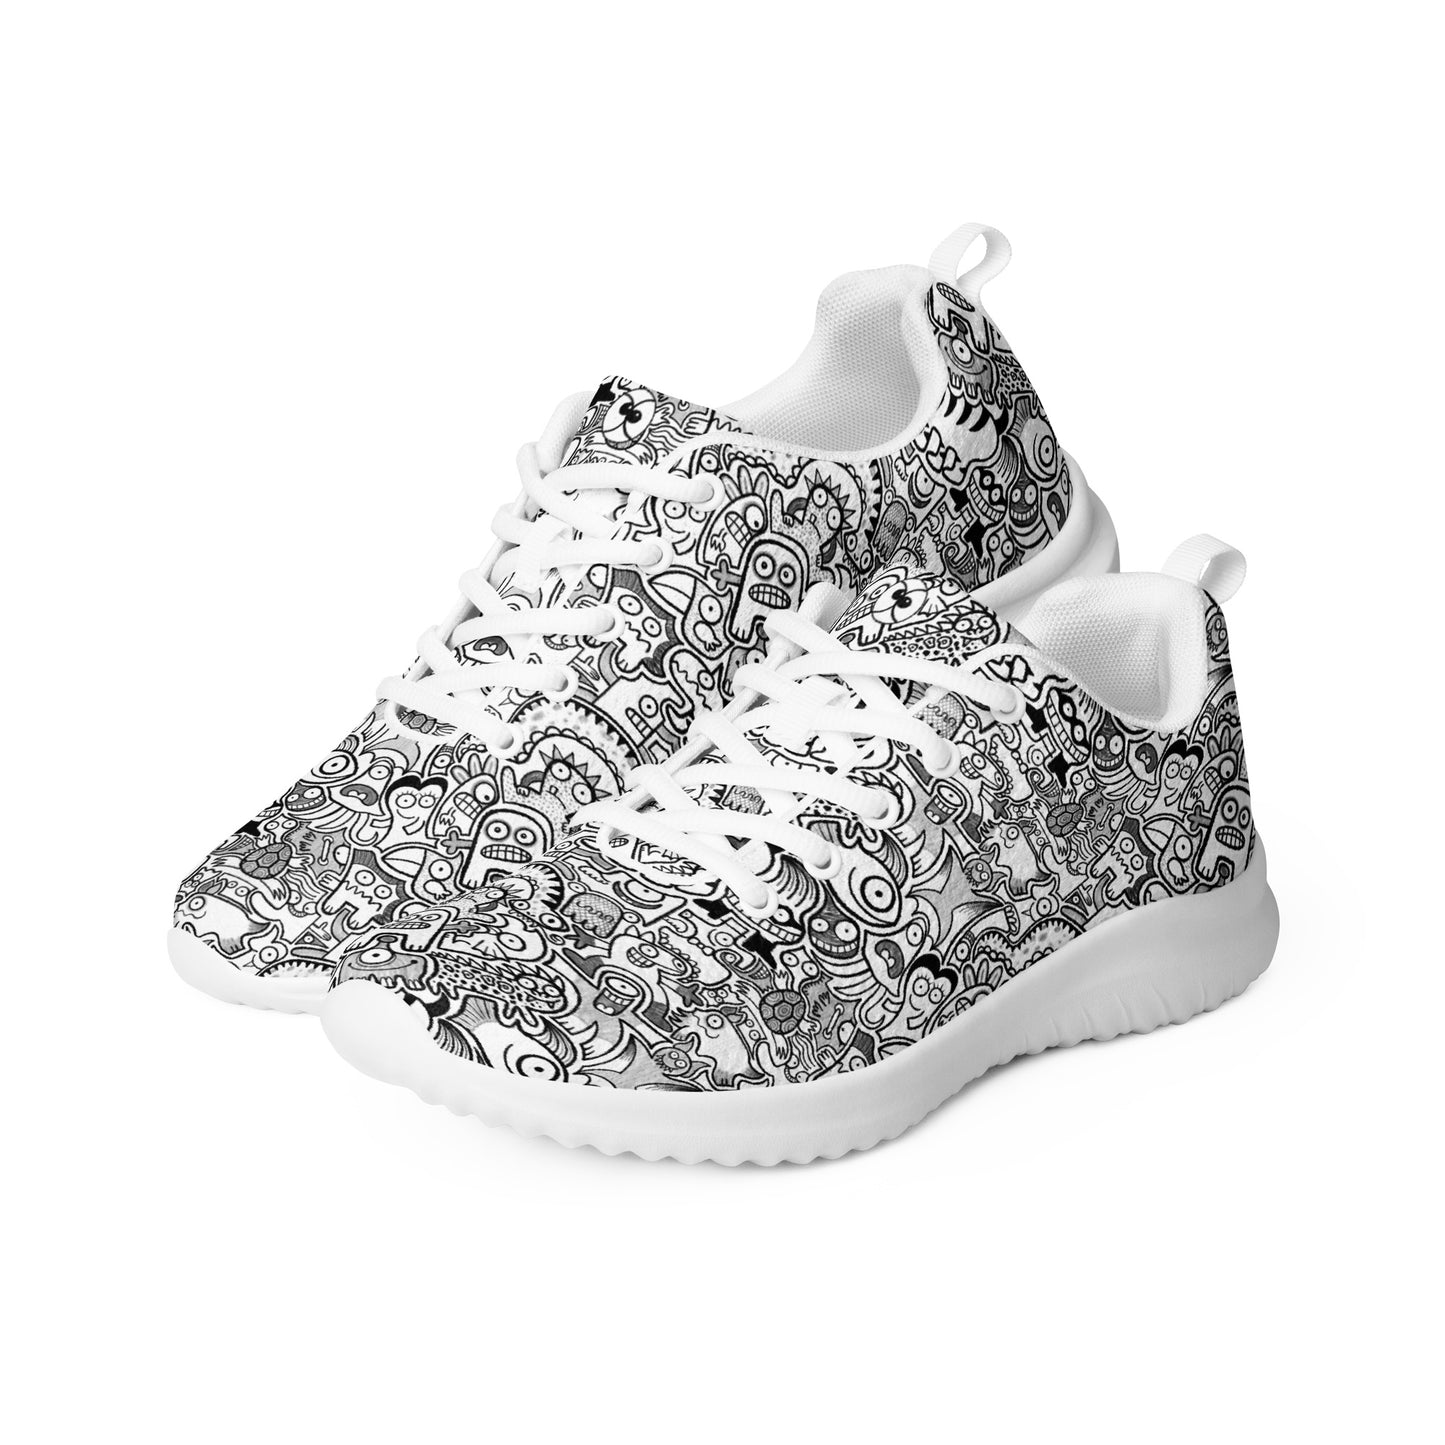 Fill your world with cool Doodles Women’s athletic shoes. Overview